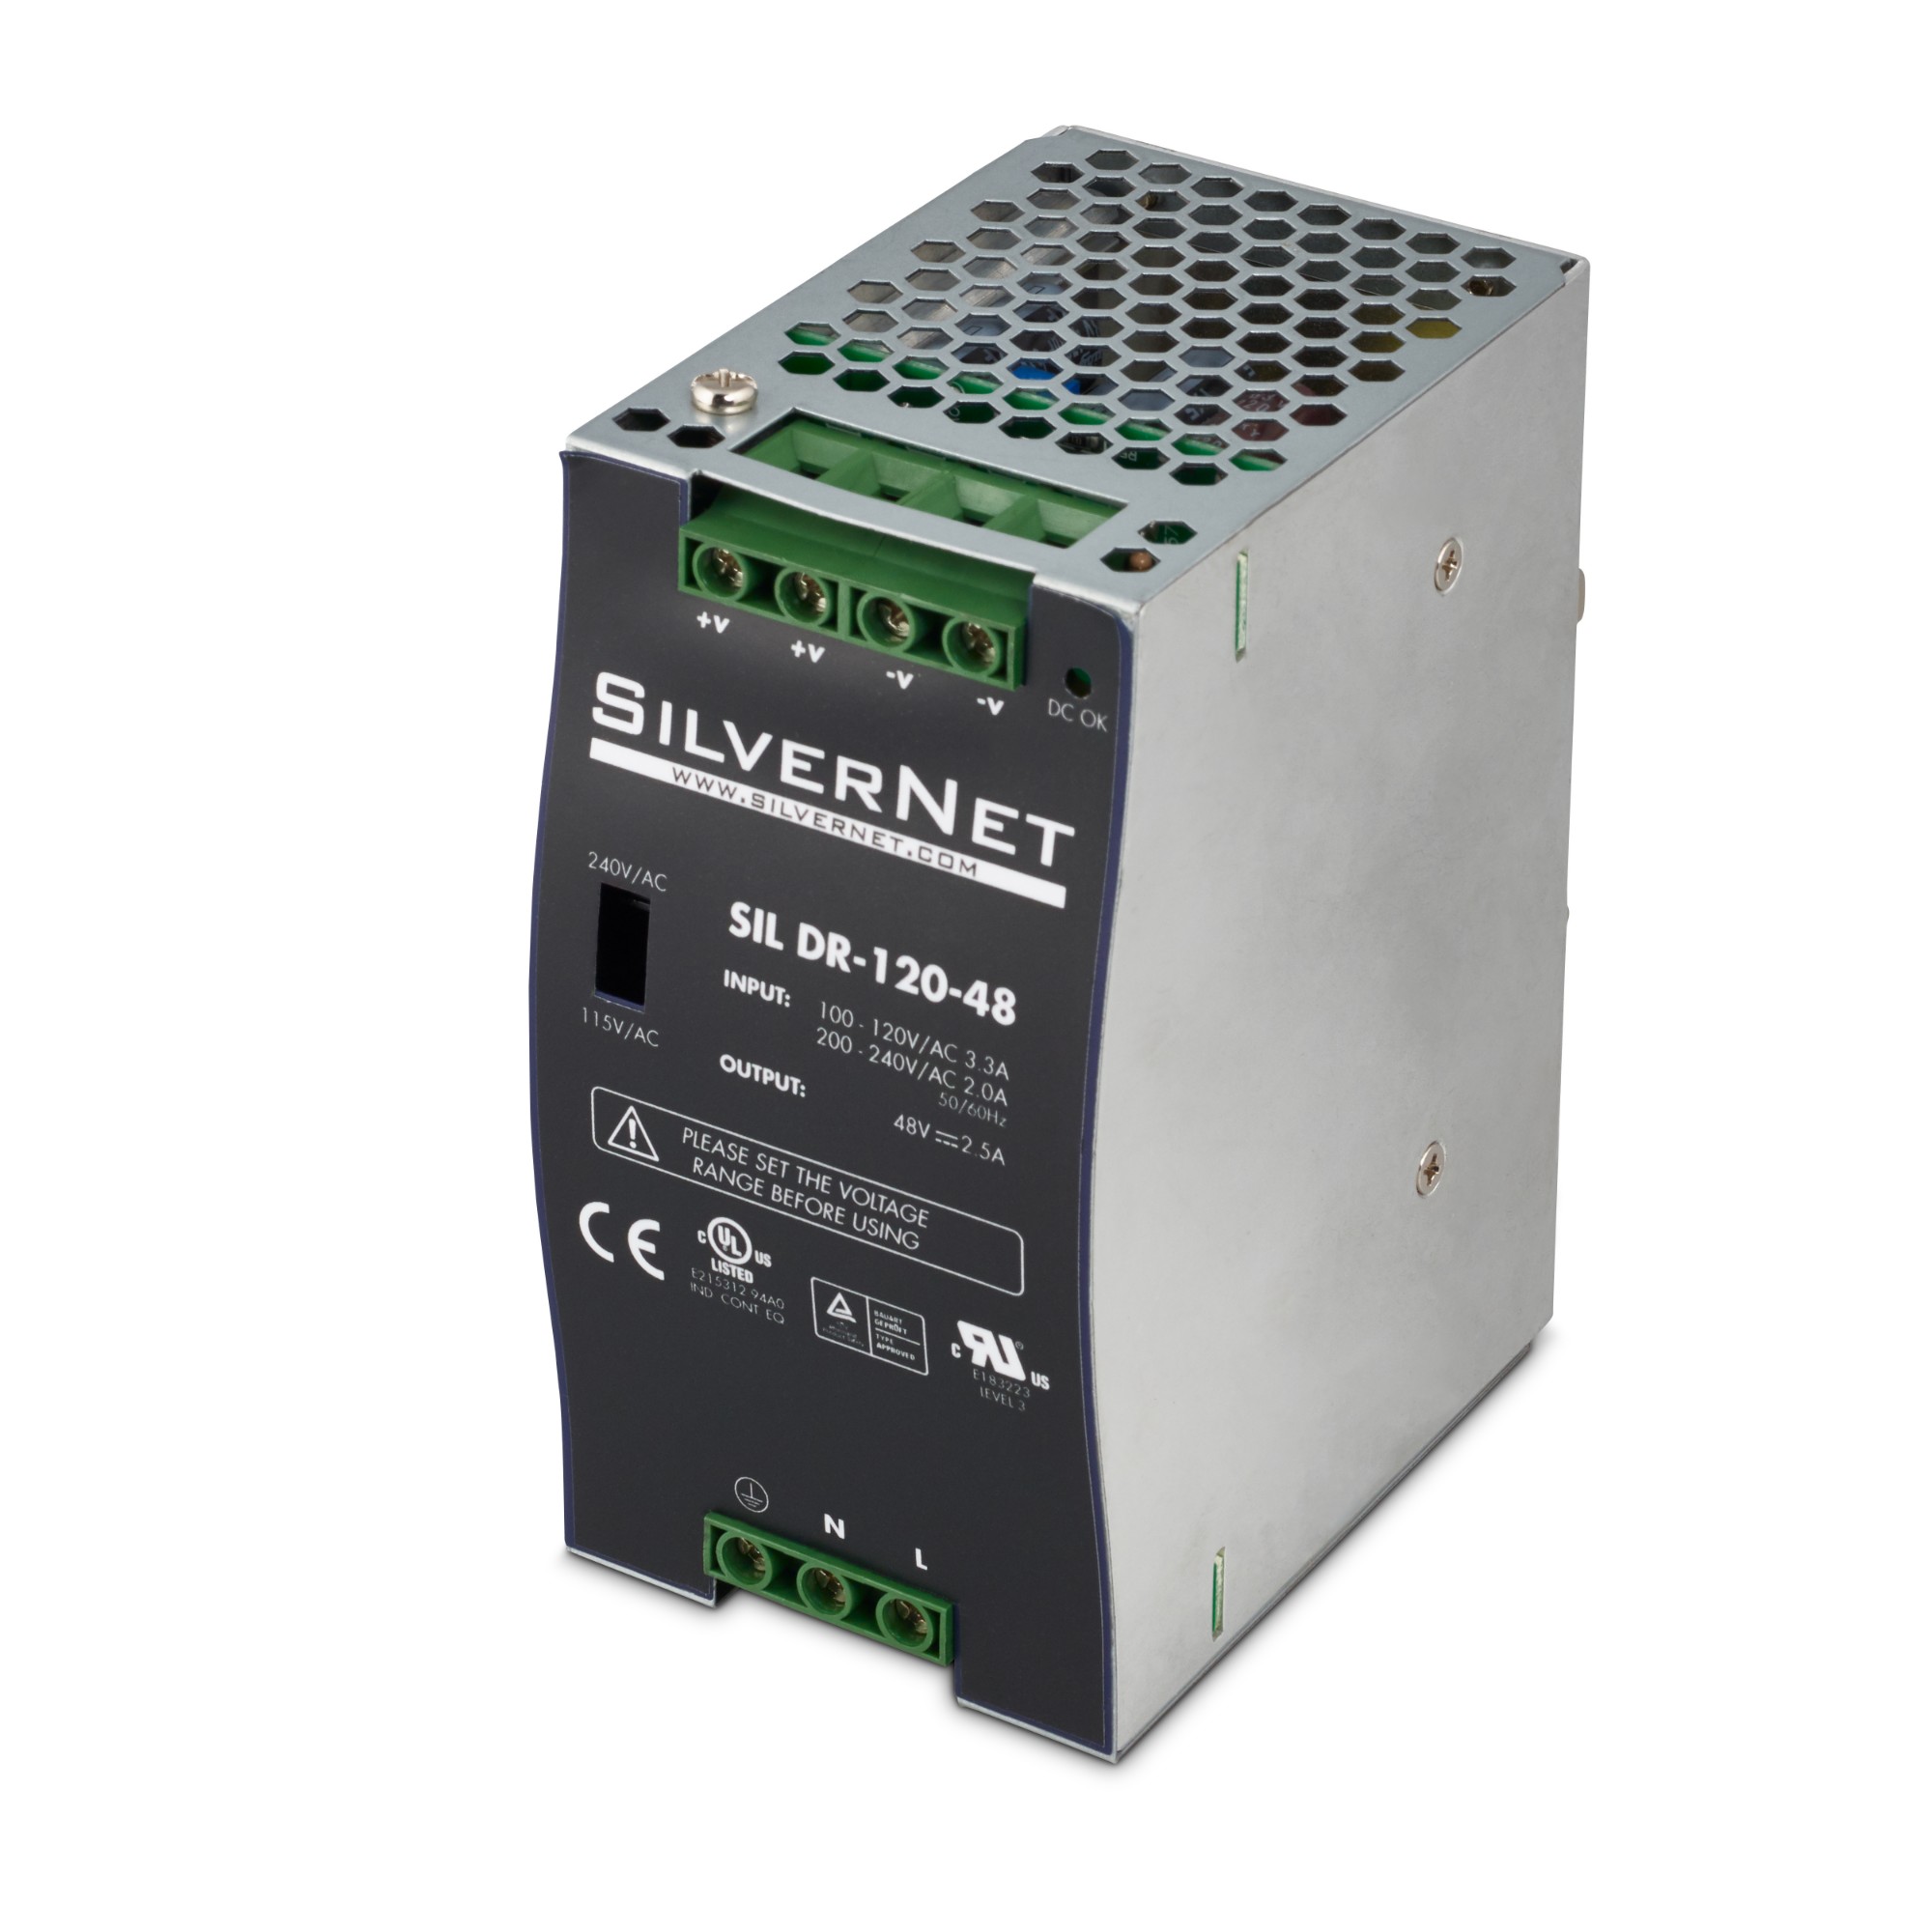 You Recently Viewed SilverNet SIL DR-120-48 Industrial PSU Image